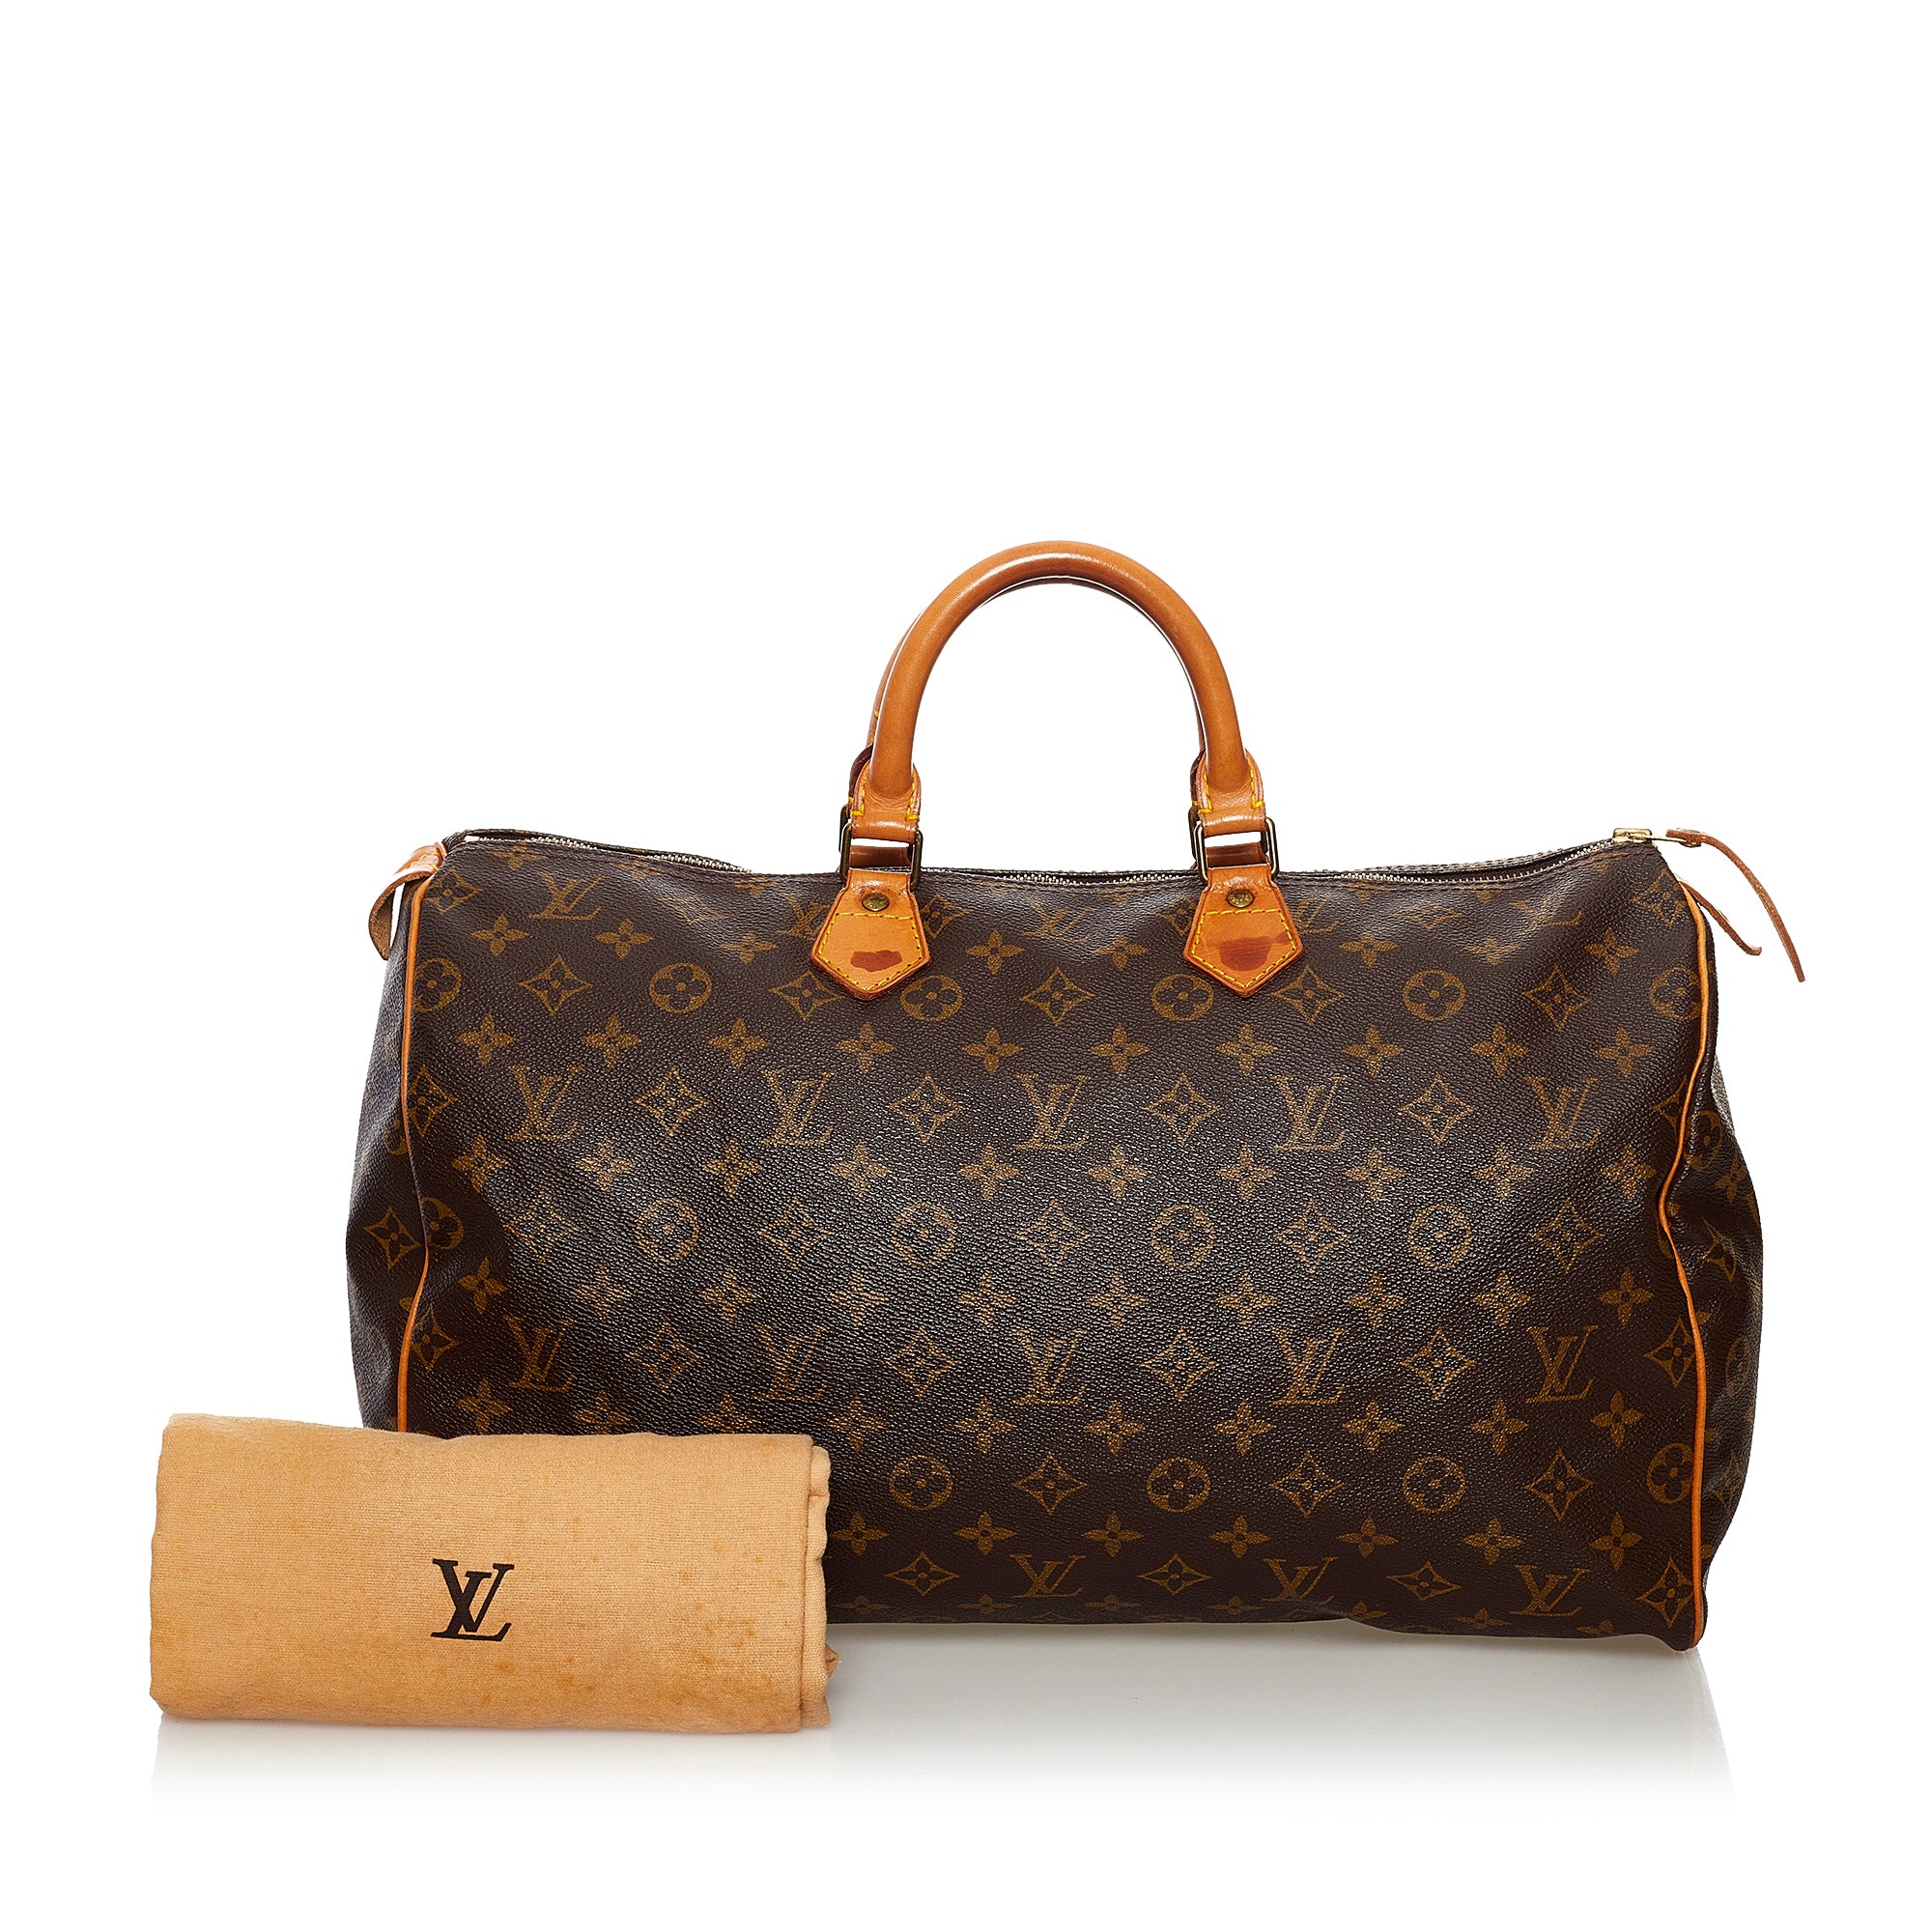 Louis Vuitton - Authenticated Handbag - Pony-Style Calfskin Brown for Women, Very Good Condition